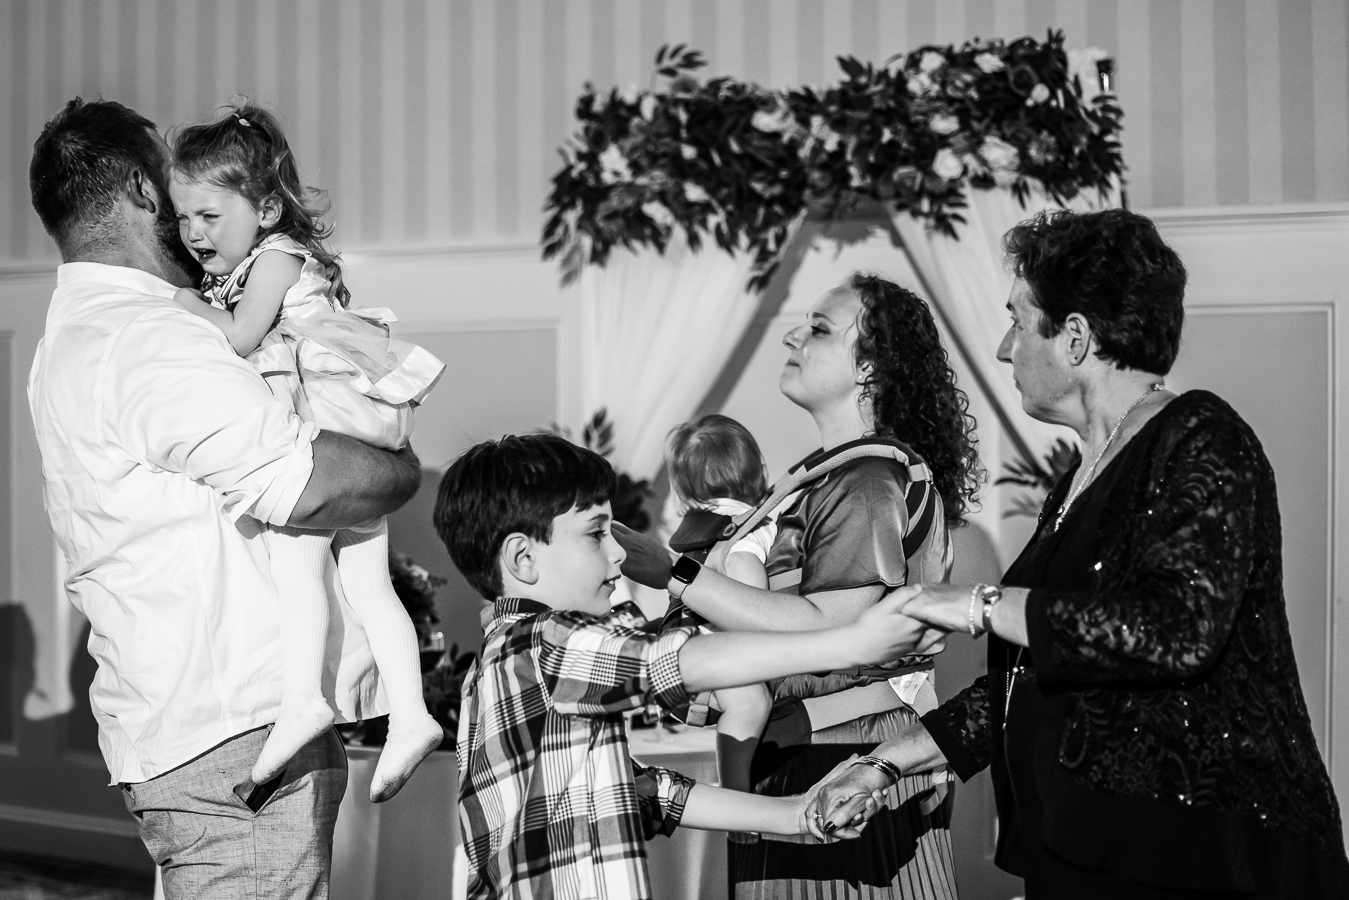 candid wedding photographer, lisa rhinehart, captures this black and white image of guests as they dance together with children during this Gettysburg hotel wedding reception 